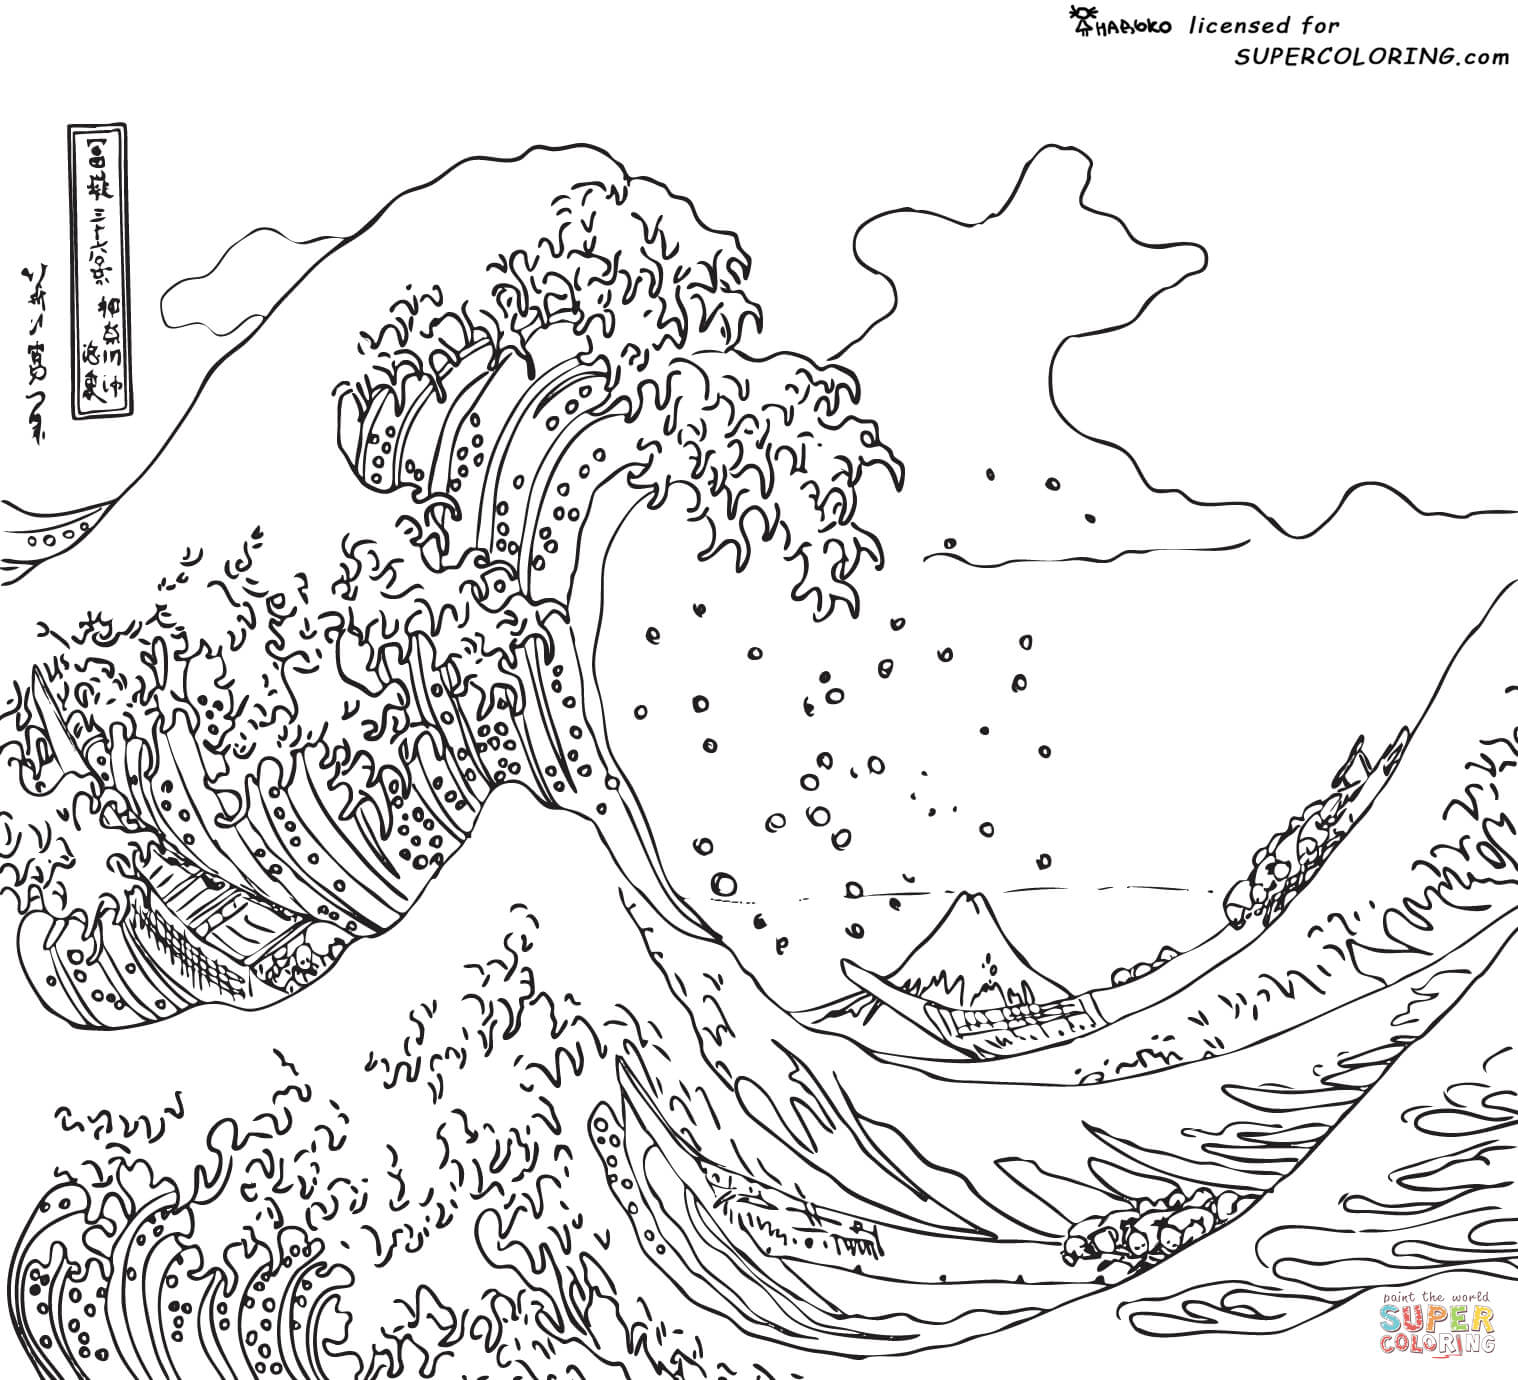 The great wave off kanagawa by hokusai coloring page free printable coloring pages